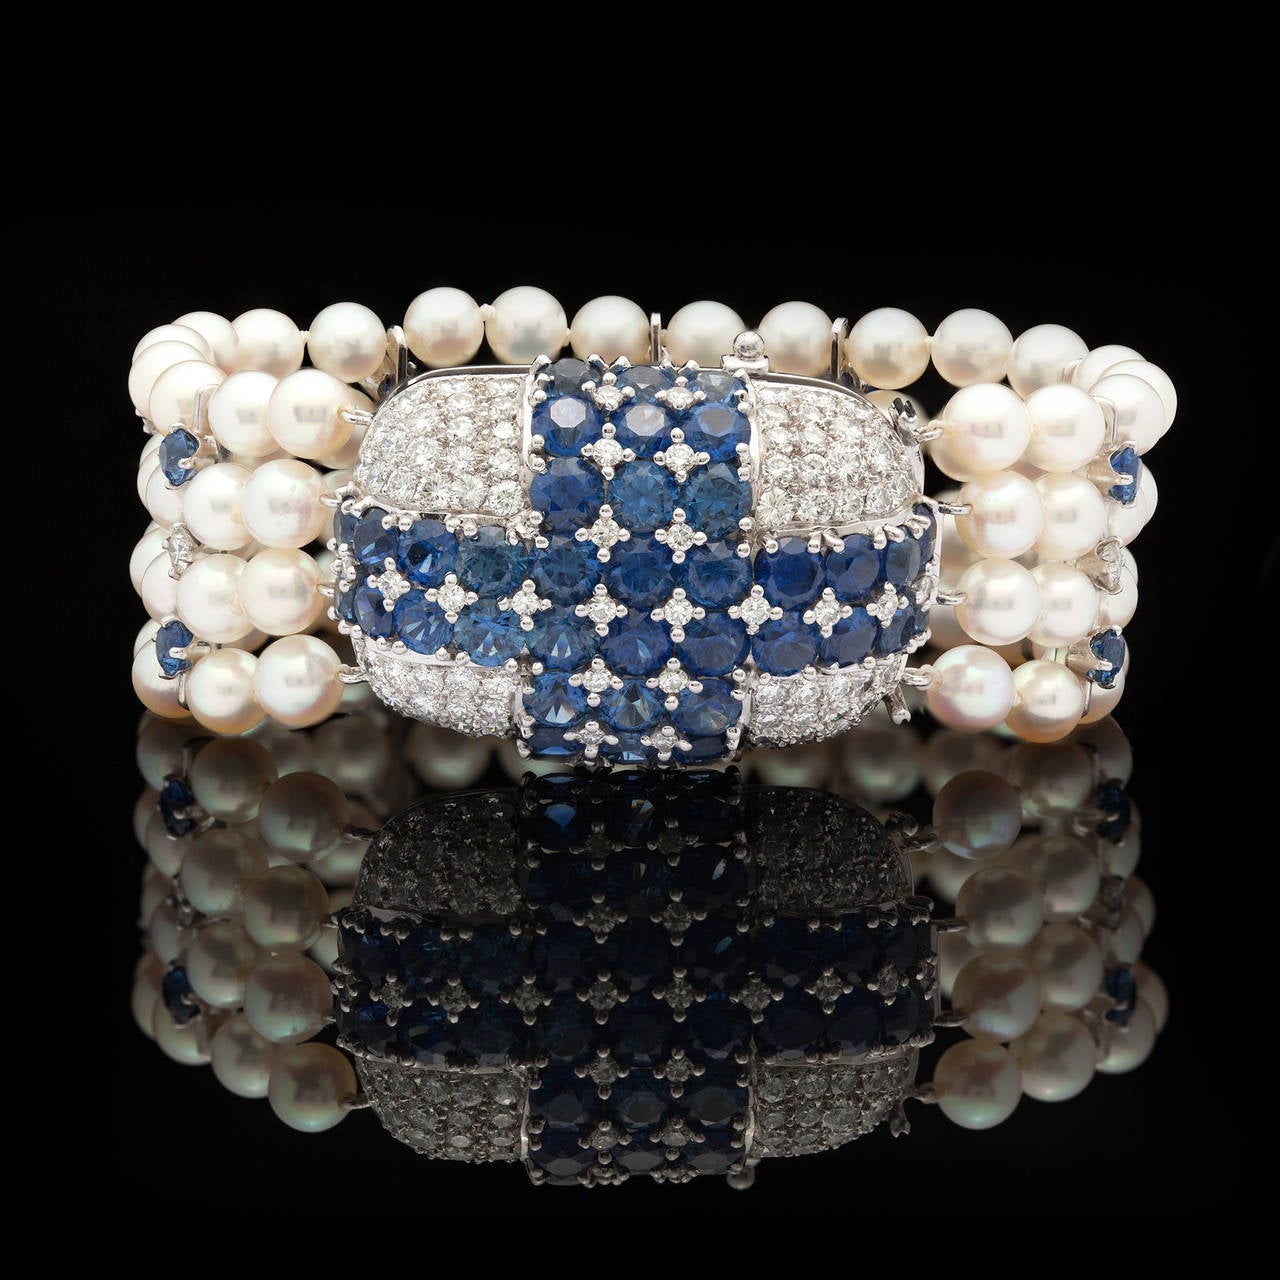 Bracelet Features Strands of Cultured Pearls Enhanced by Round Brilliant Cut Diamonds and Sapphires on a Jeweled Platinum Clasp, signed Ruser. There are approximately 3.28 cts. of diamonds and 8.00 cts. of sapphires decorating this piece. The